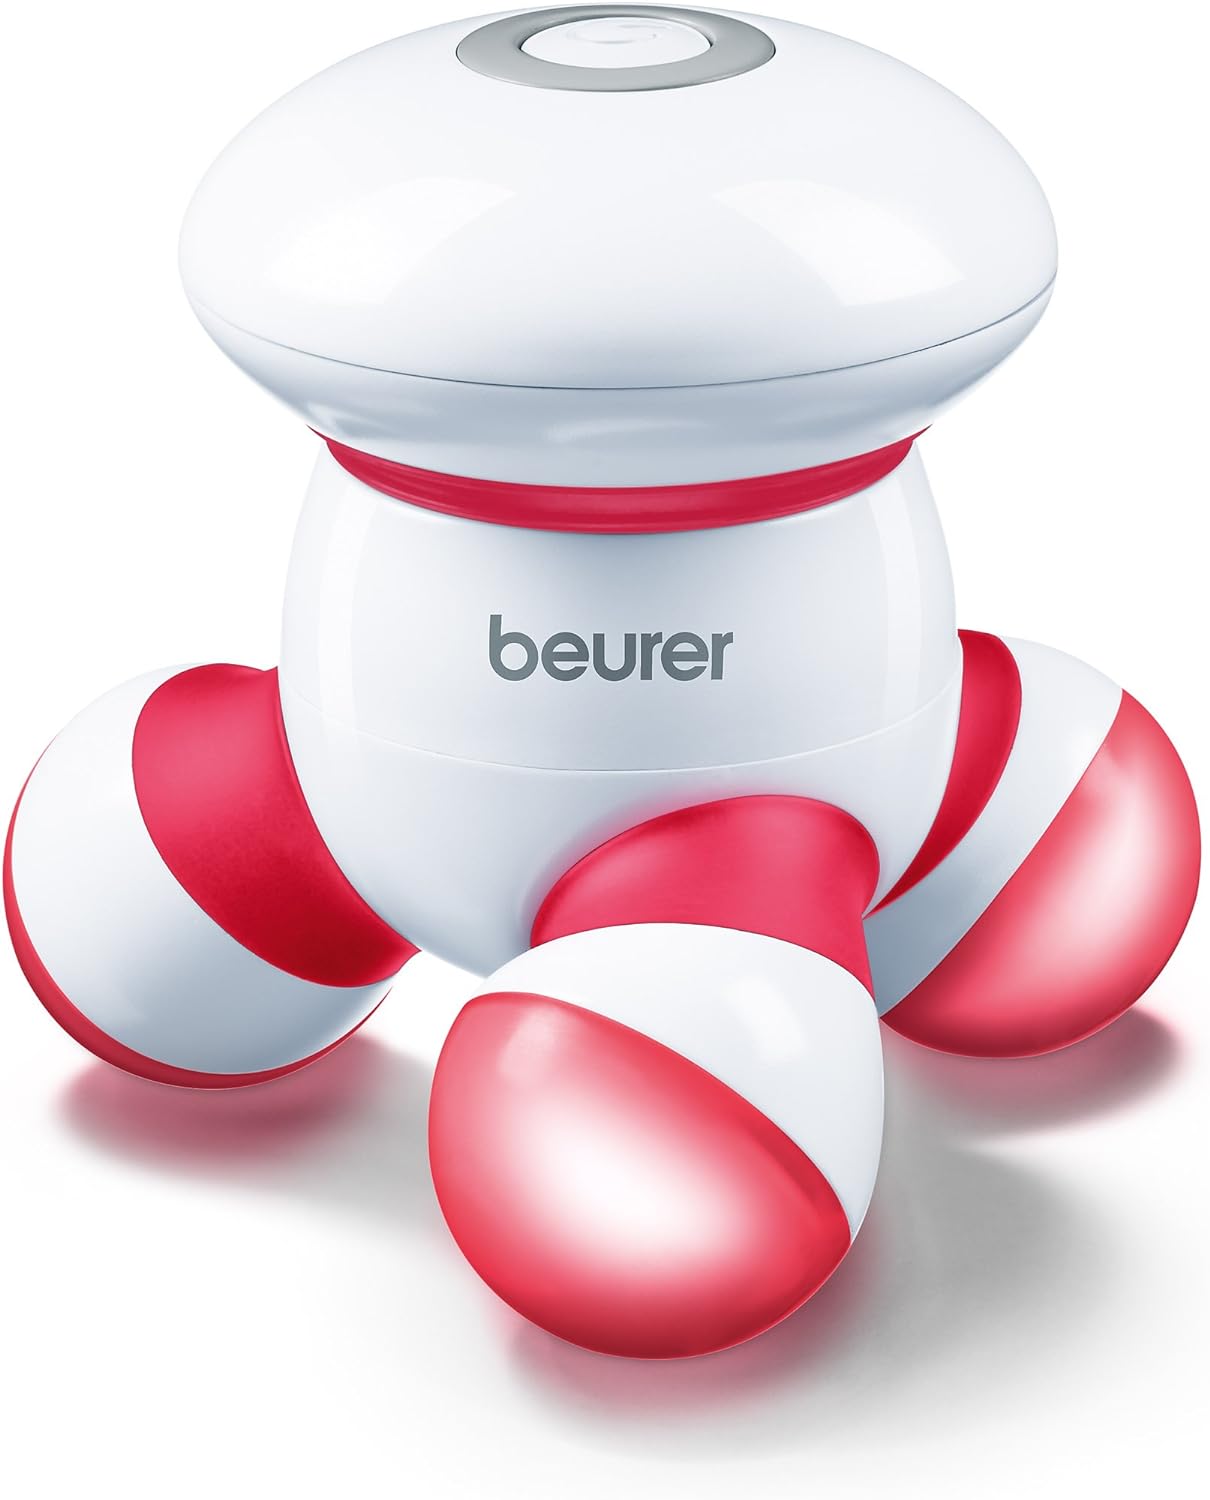 Beurer Handheld Mini Body Massager with LED light, Gentle and Comforta